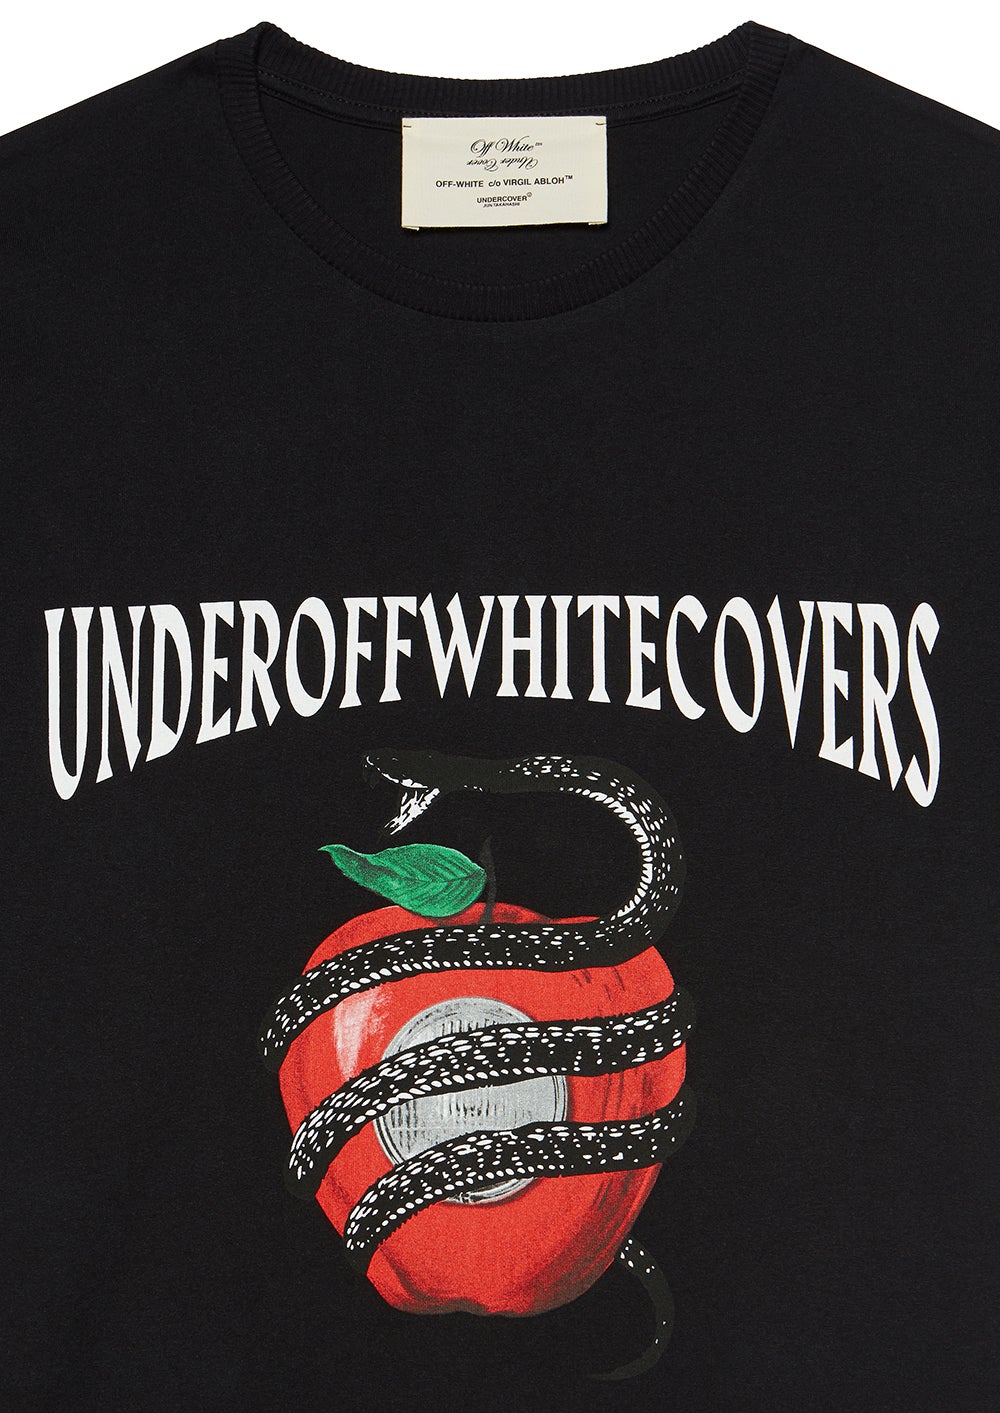 Off-White x Undercover Are Dropping A Capsule Collection This Weekend